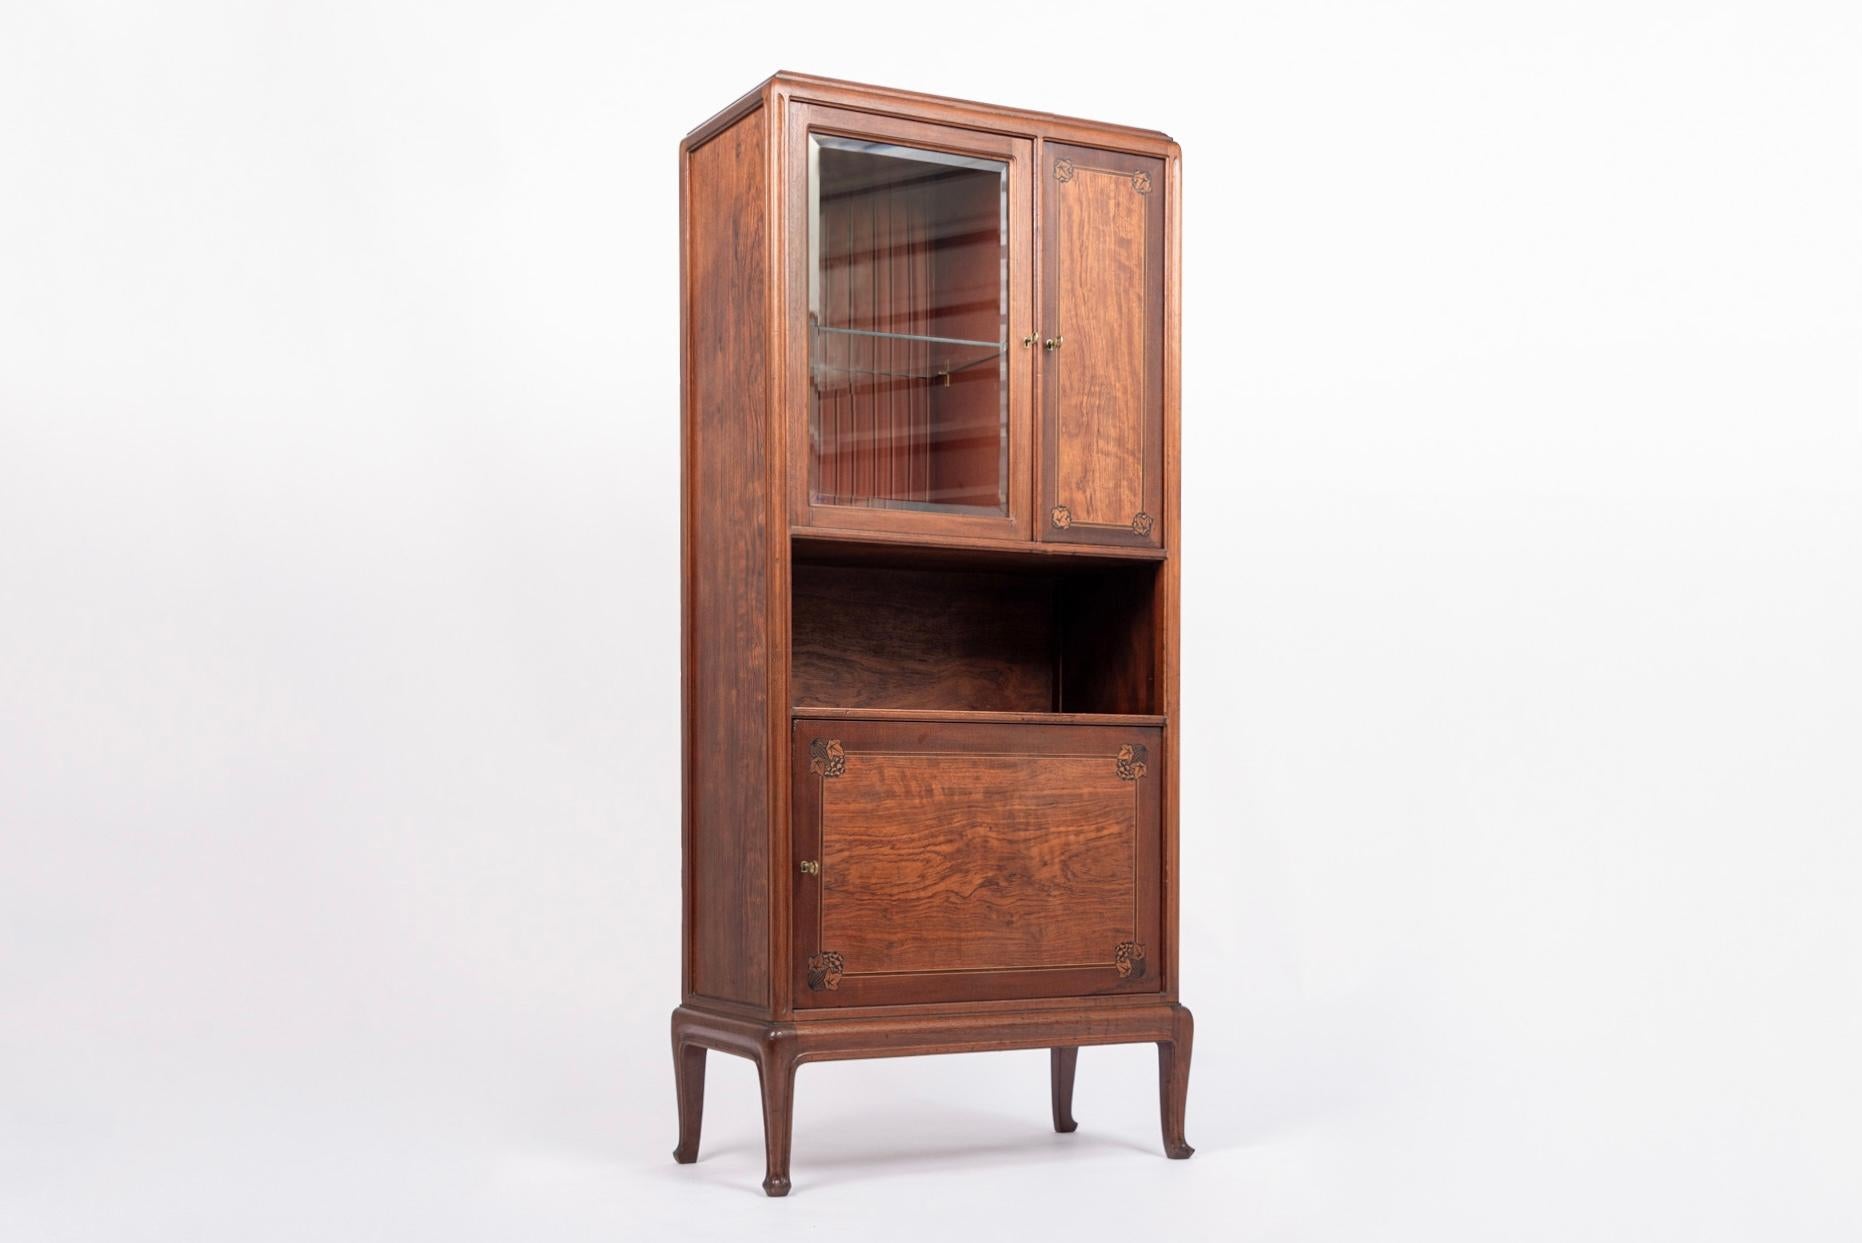 This exquisite antique French Art Nouveau inlaid wood and glass cabinet was designed by Louis Majorelle and made in Nancy, France circa 1910-1920. This exceptional, museum quality cabinet exemplifies elegant, Art Nouveau design featuring sinuous,